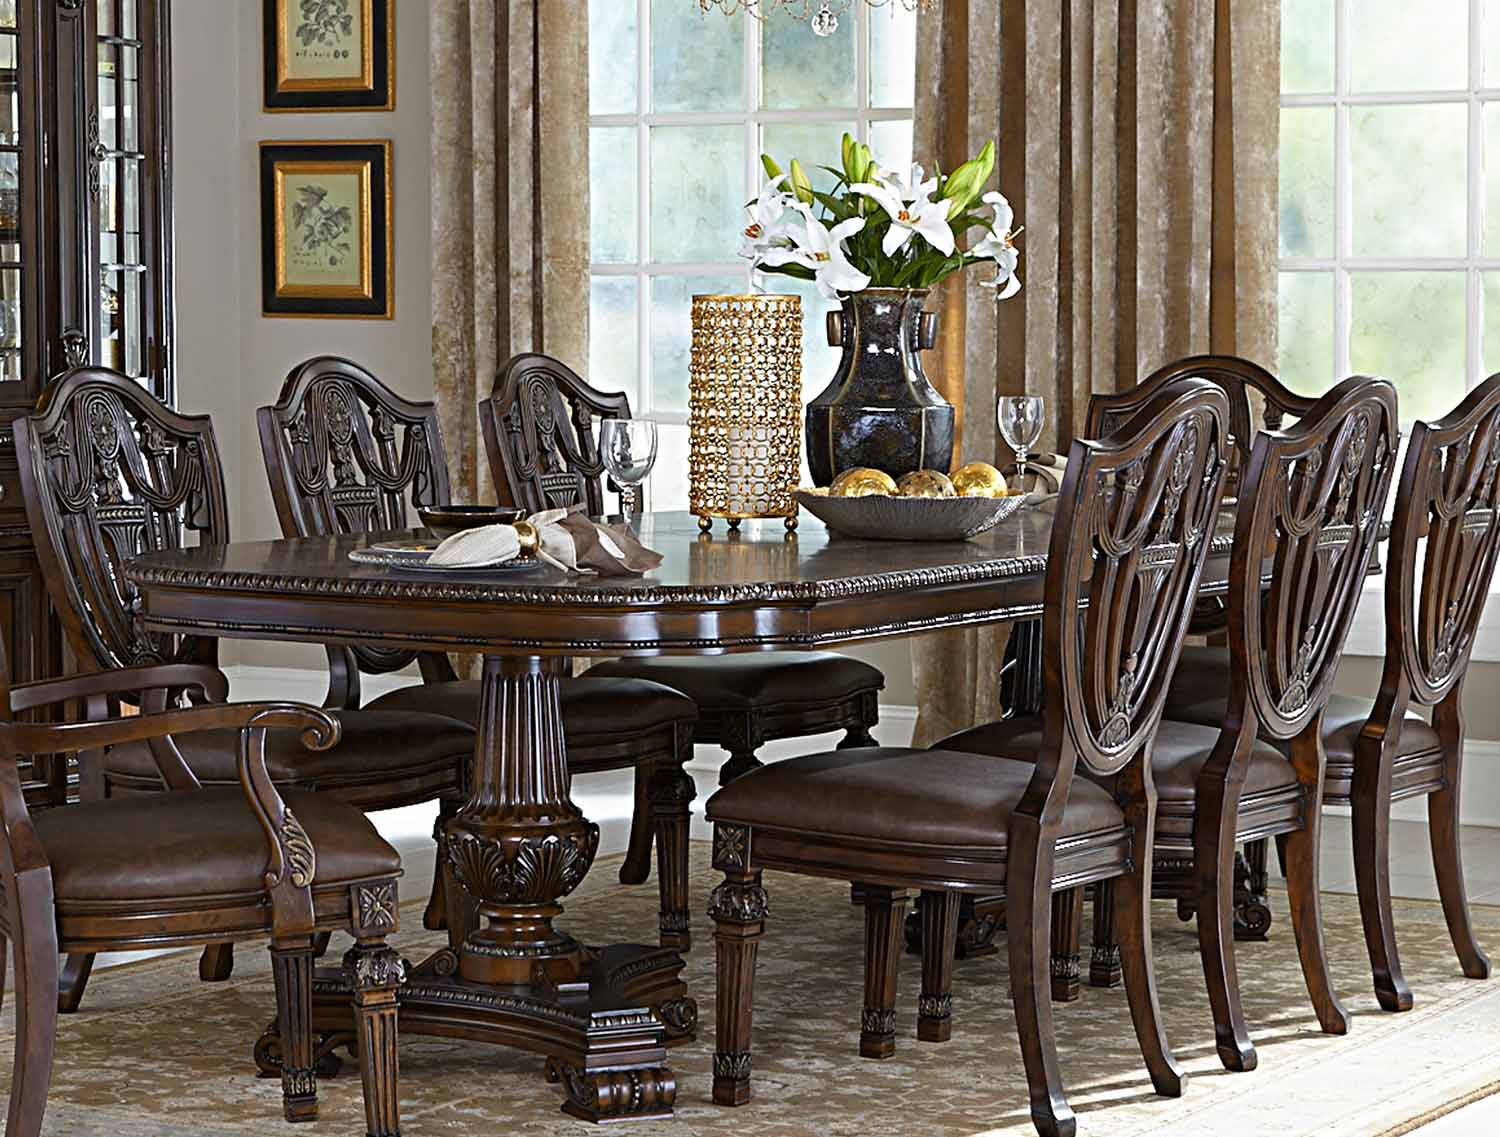 Homelegance Chilton Double Pedestal Dining Table with Leaf - Cherry